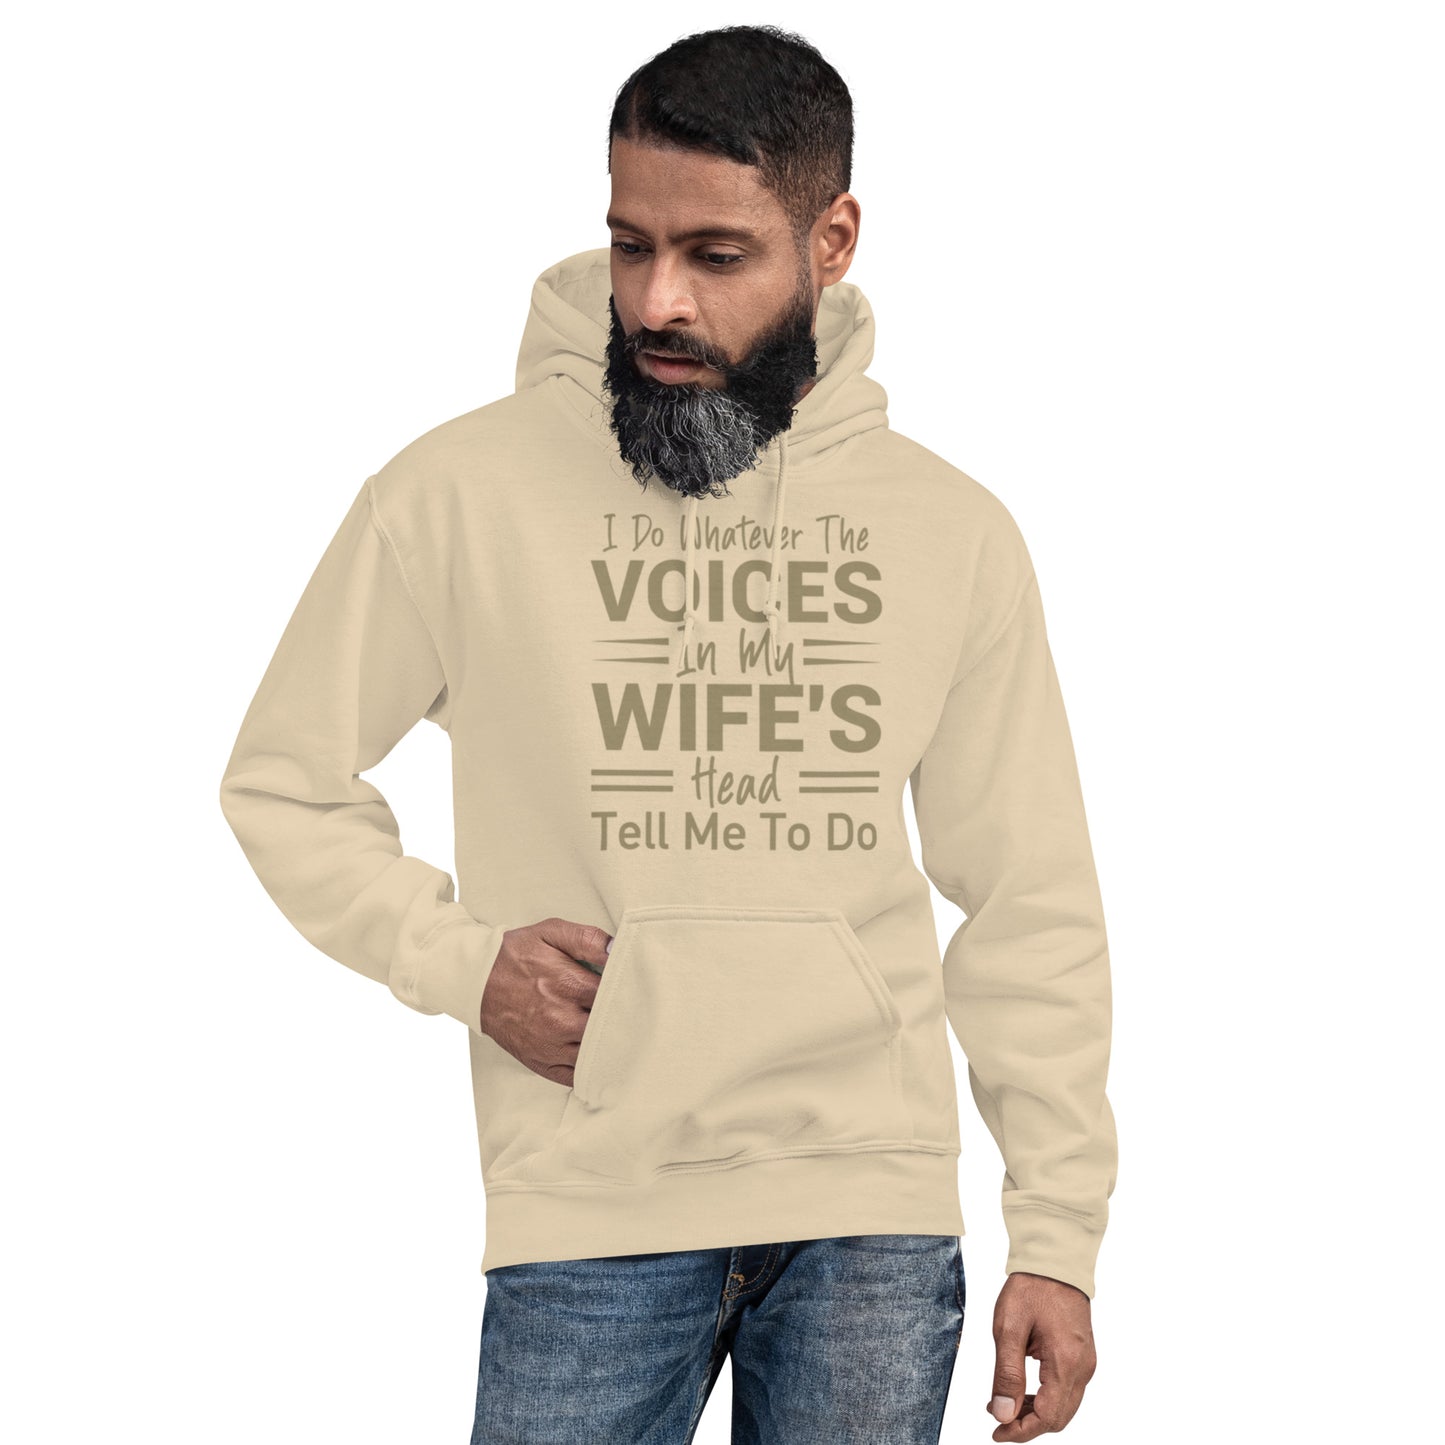 I Do Whatever The Voices In My Wife's Head Tell Me To Do Unisex Hoodie